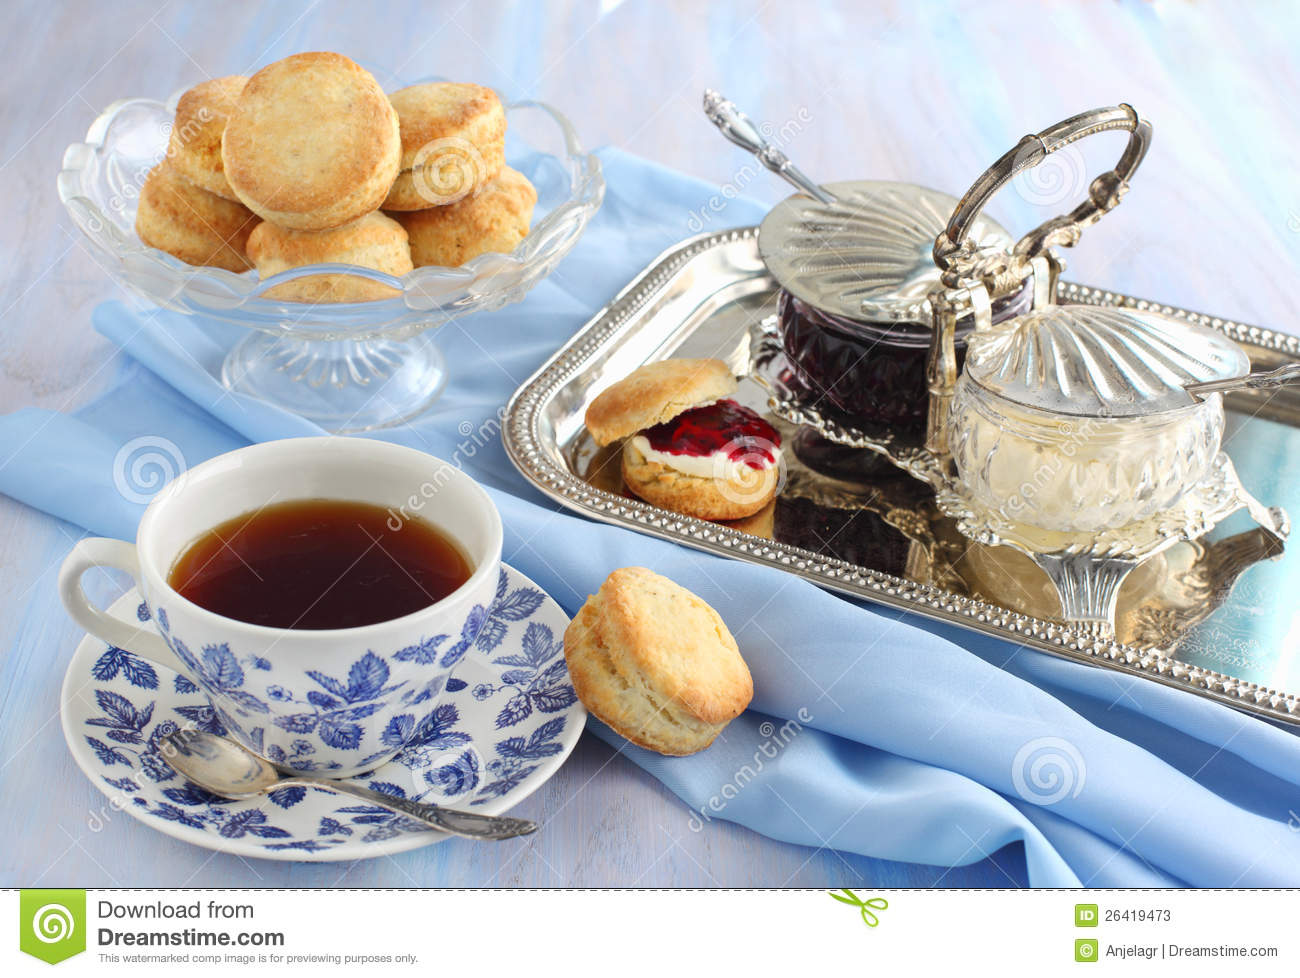 Homemade Scones With Jam And Double Cream  Stock Photos   Image    